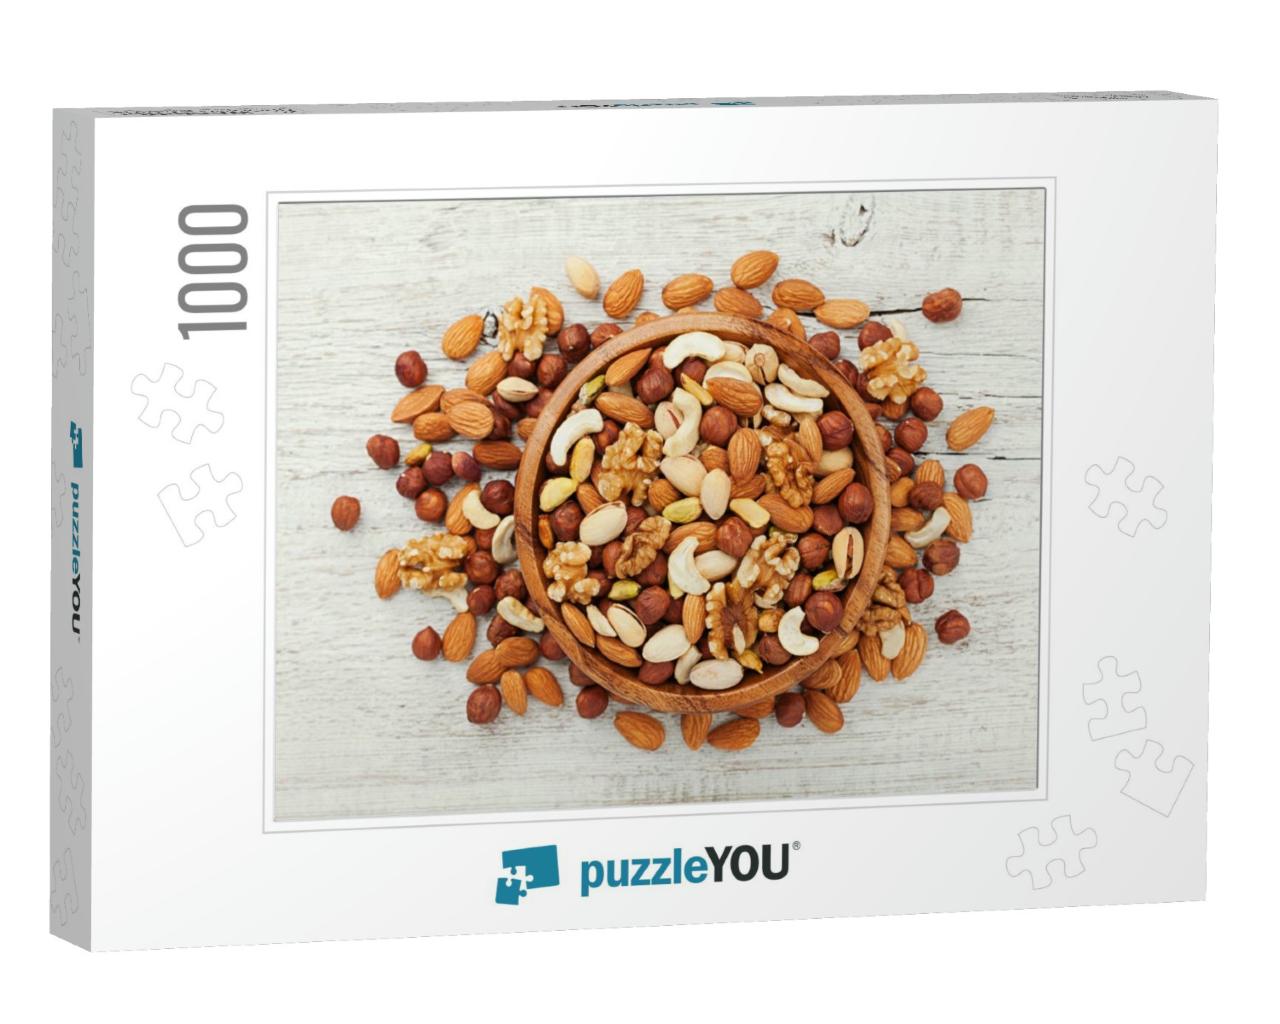 Wooden Bowl with Mixed Nuts on White Table Top View. Heal... Jigsaw Puzzle with 1000 pieces